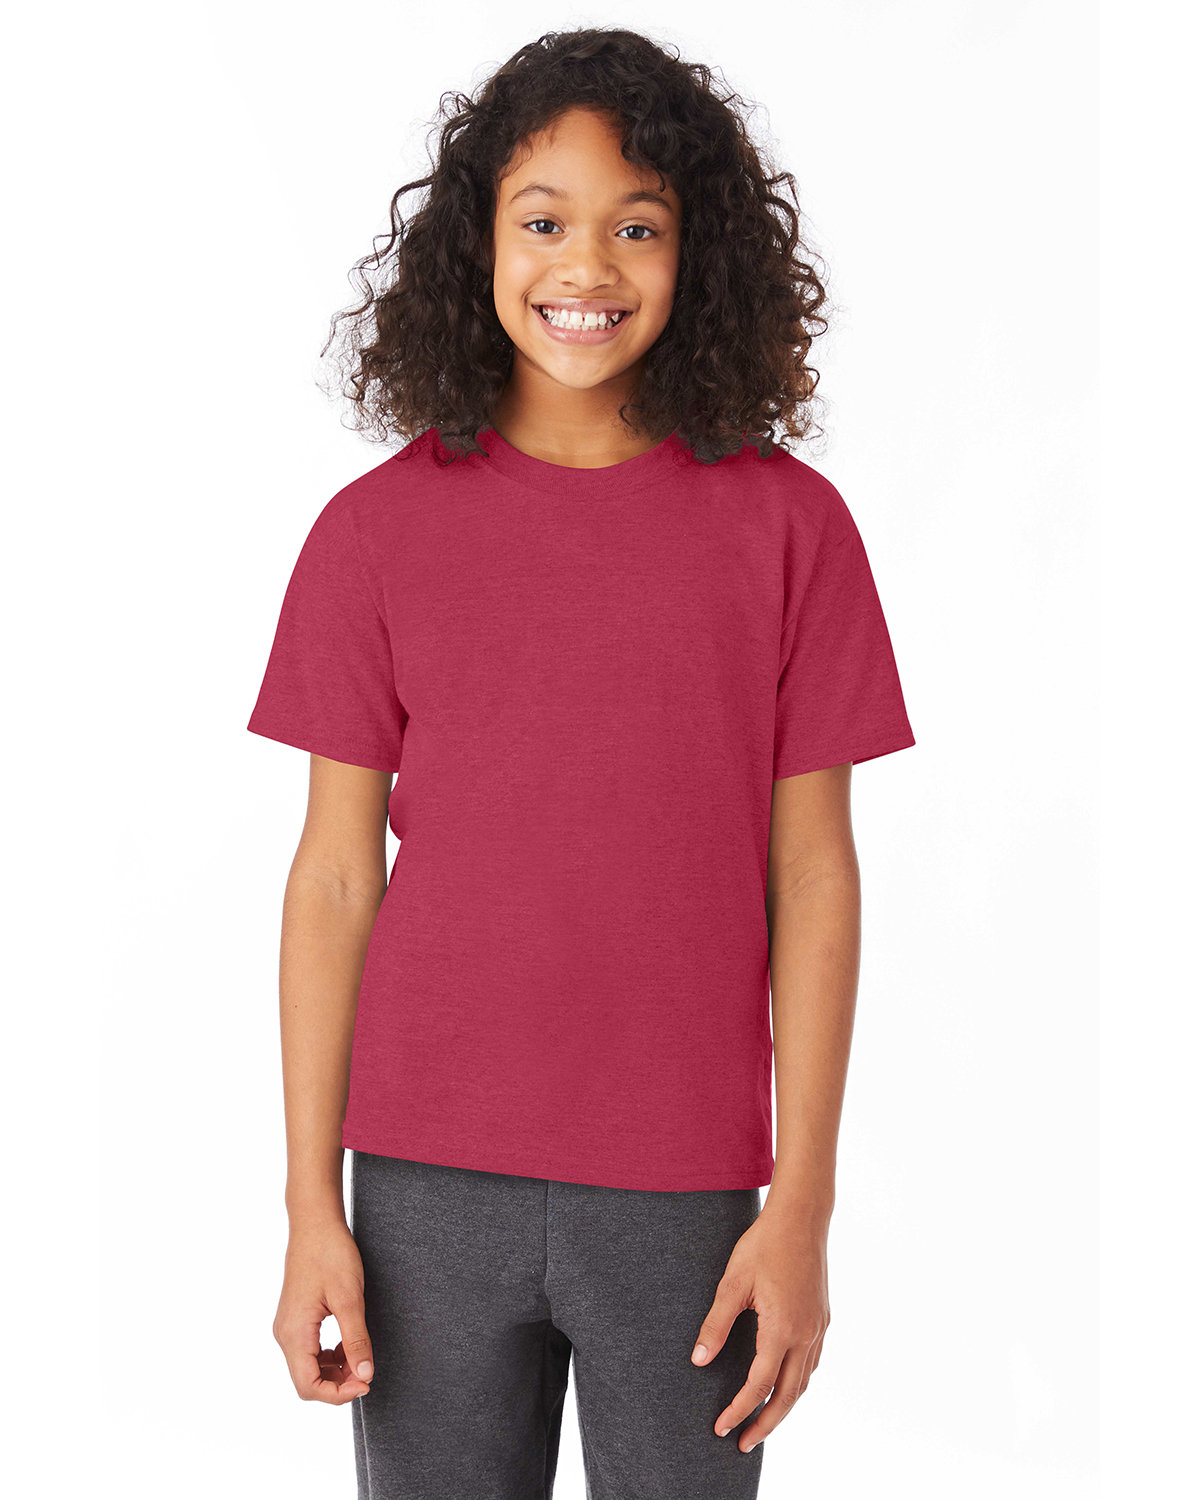 Hanes Youth 50/50 T-Shirt HEATHER RED 